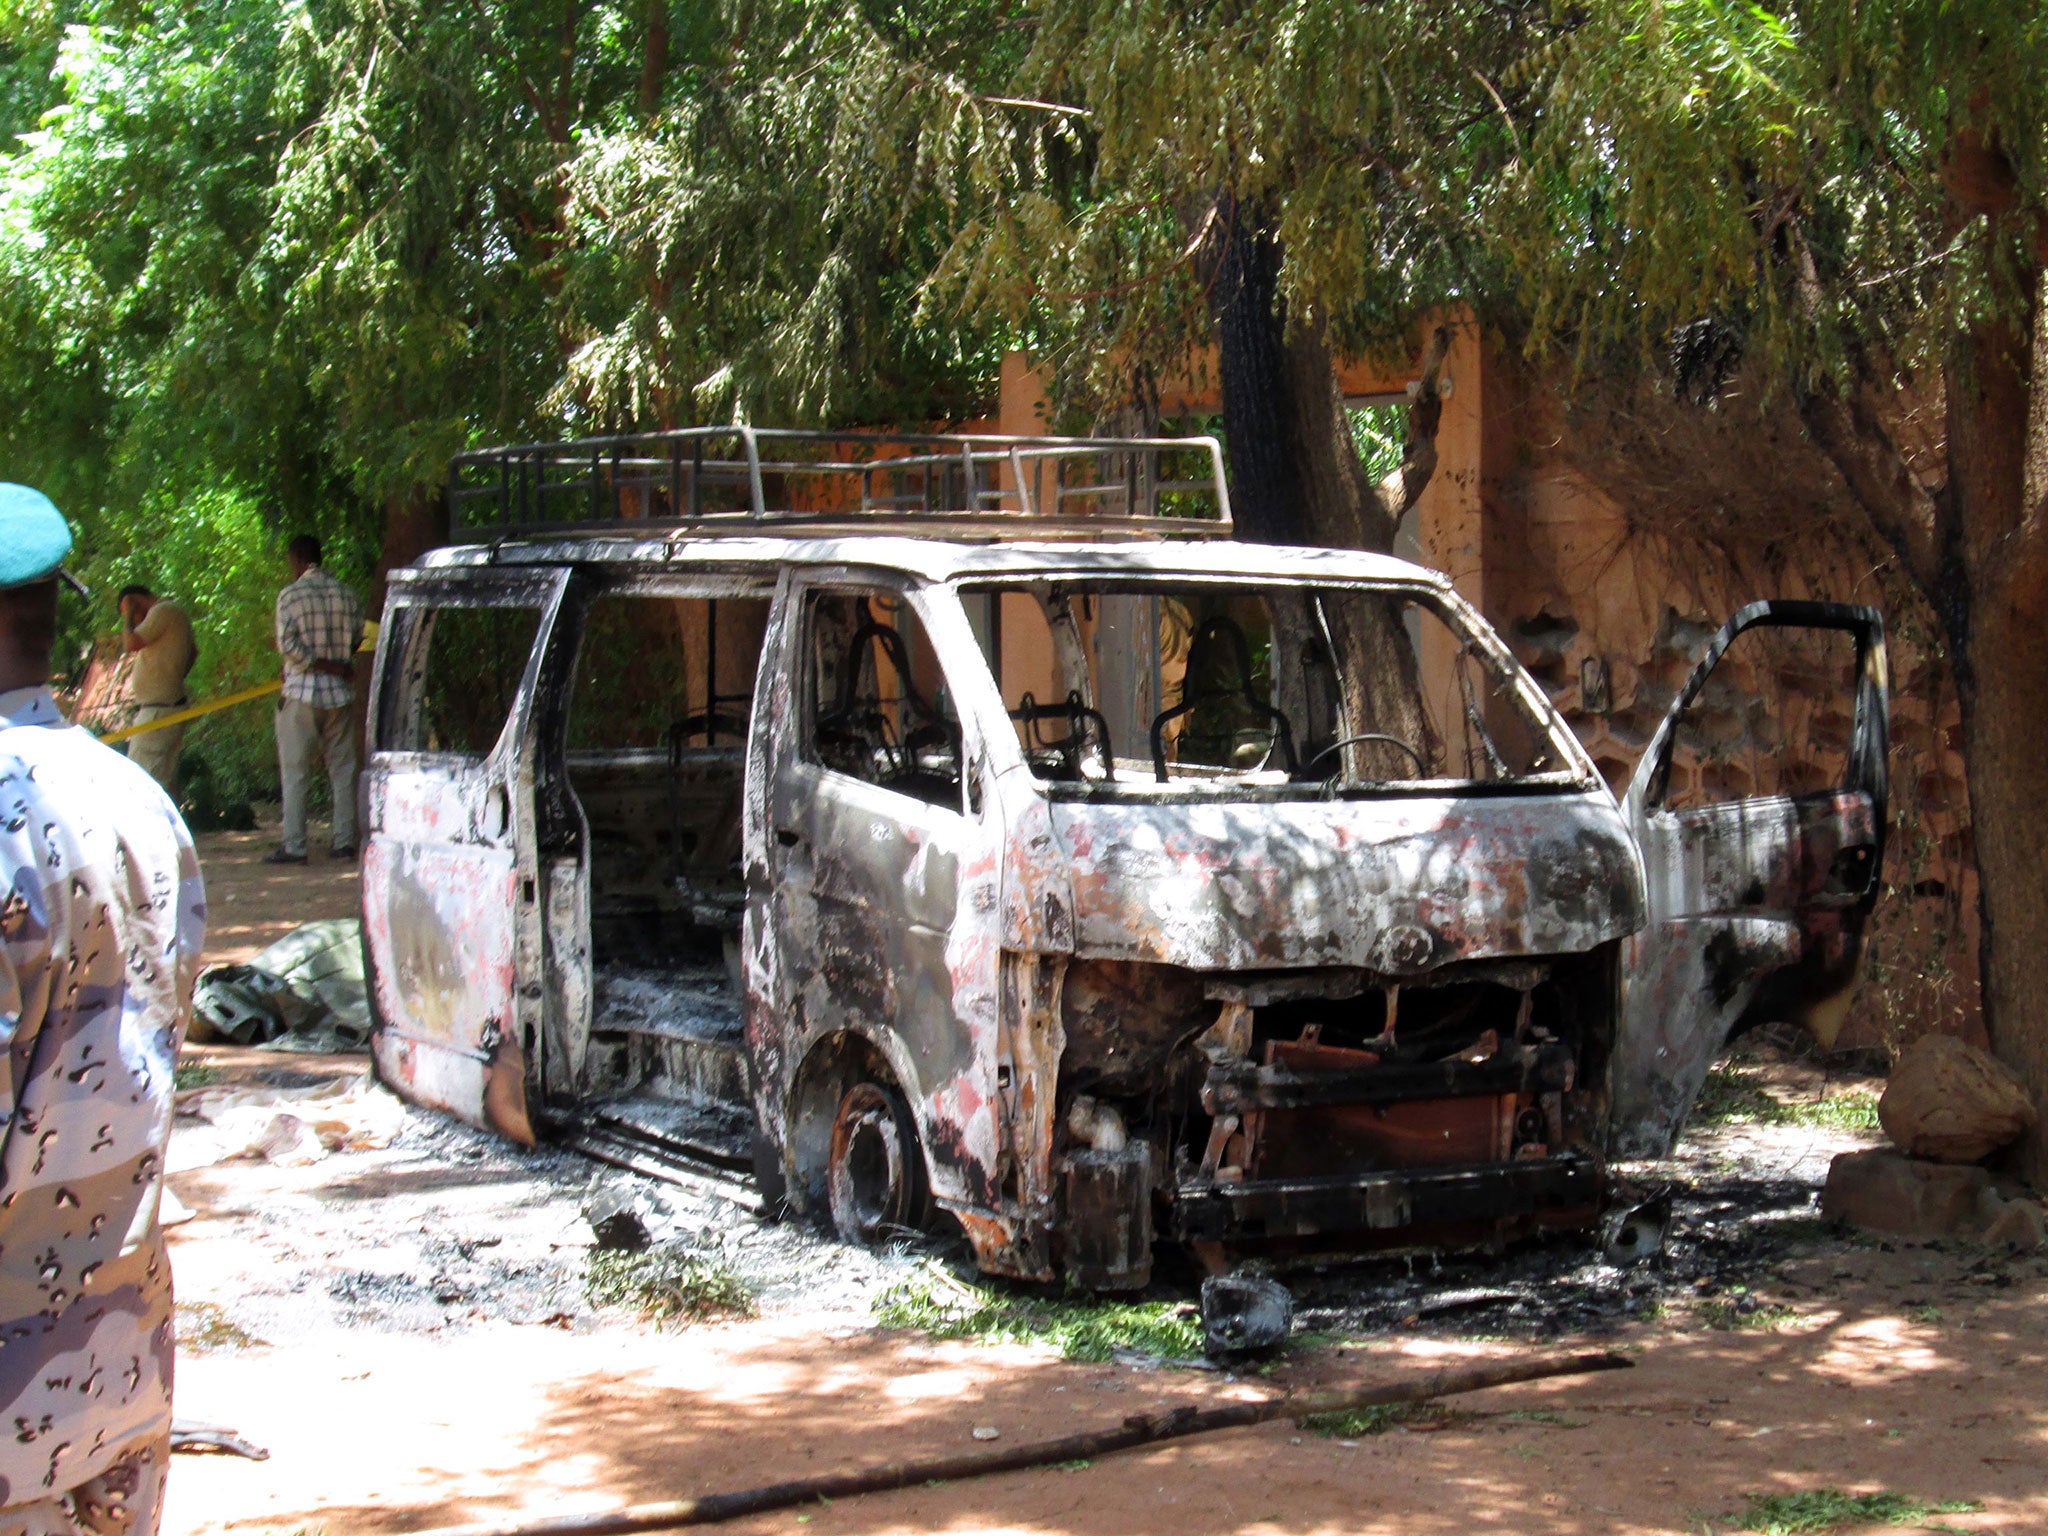 A burned vehicle in front of the Hotel Byblos in the central Malian town of Sevare, after gunmen stormed the hotel on August 7